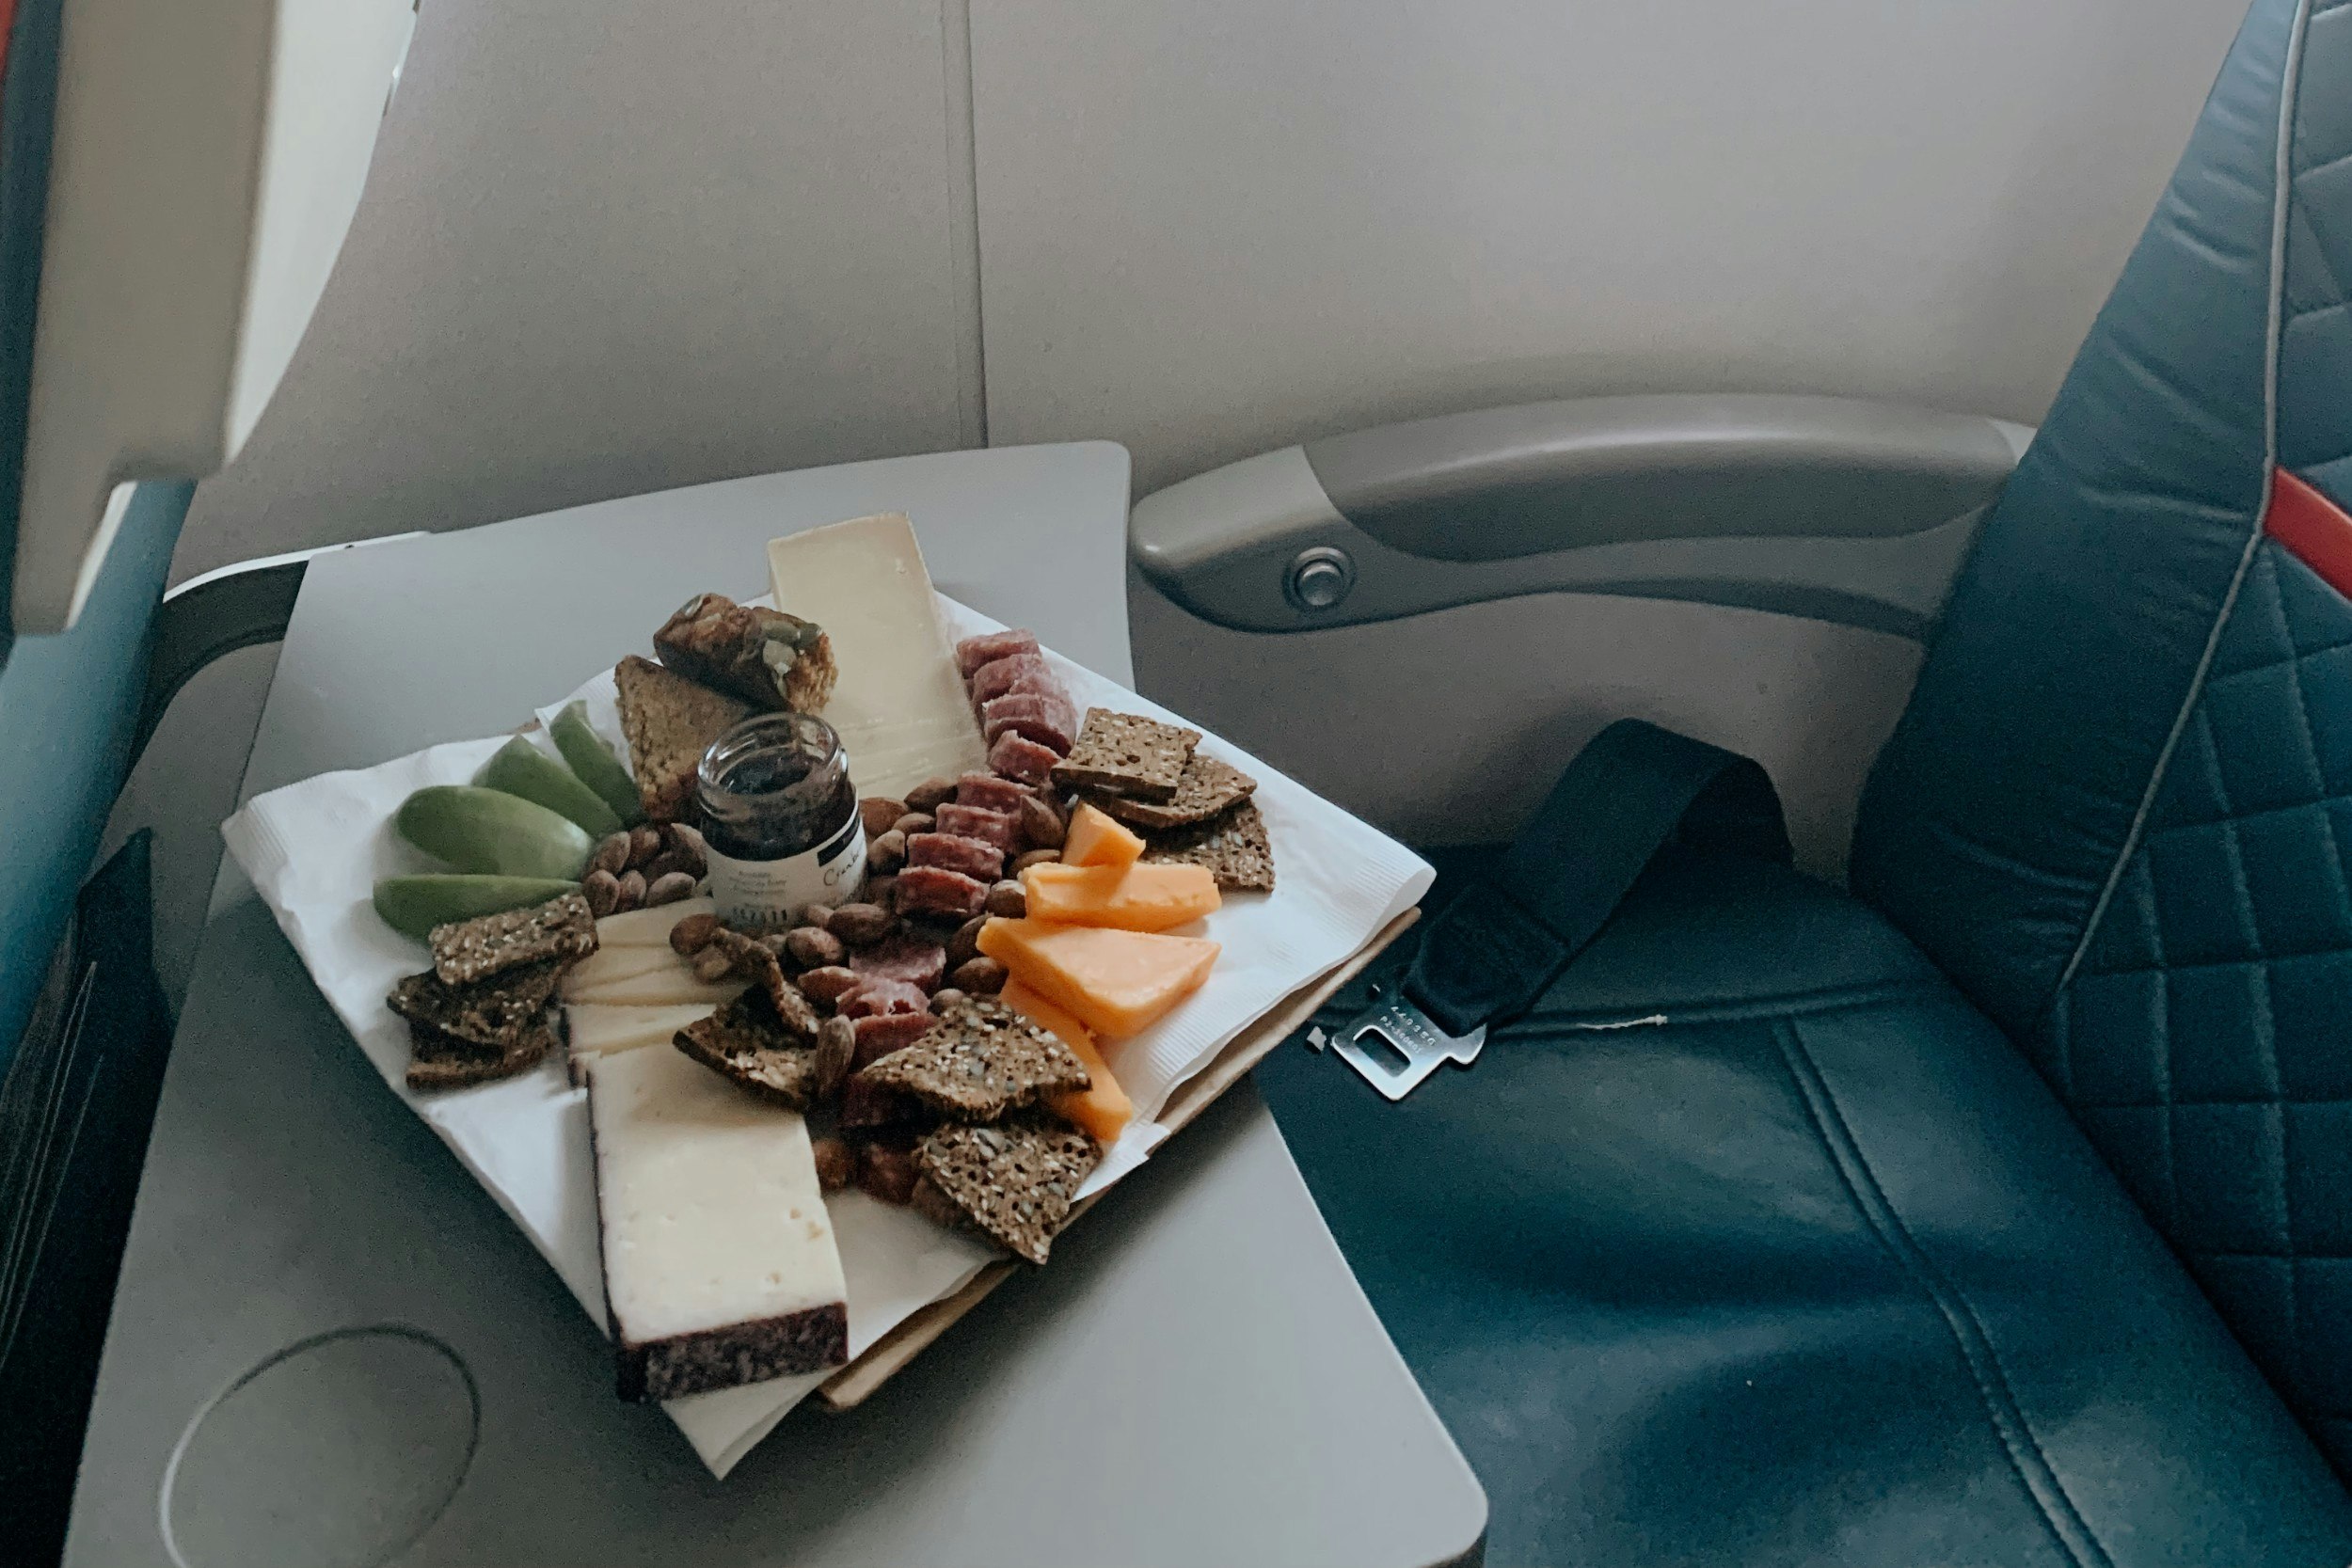 A cheese board on a plane